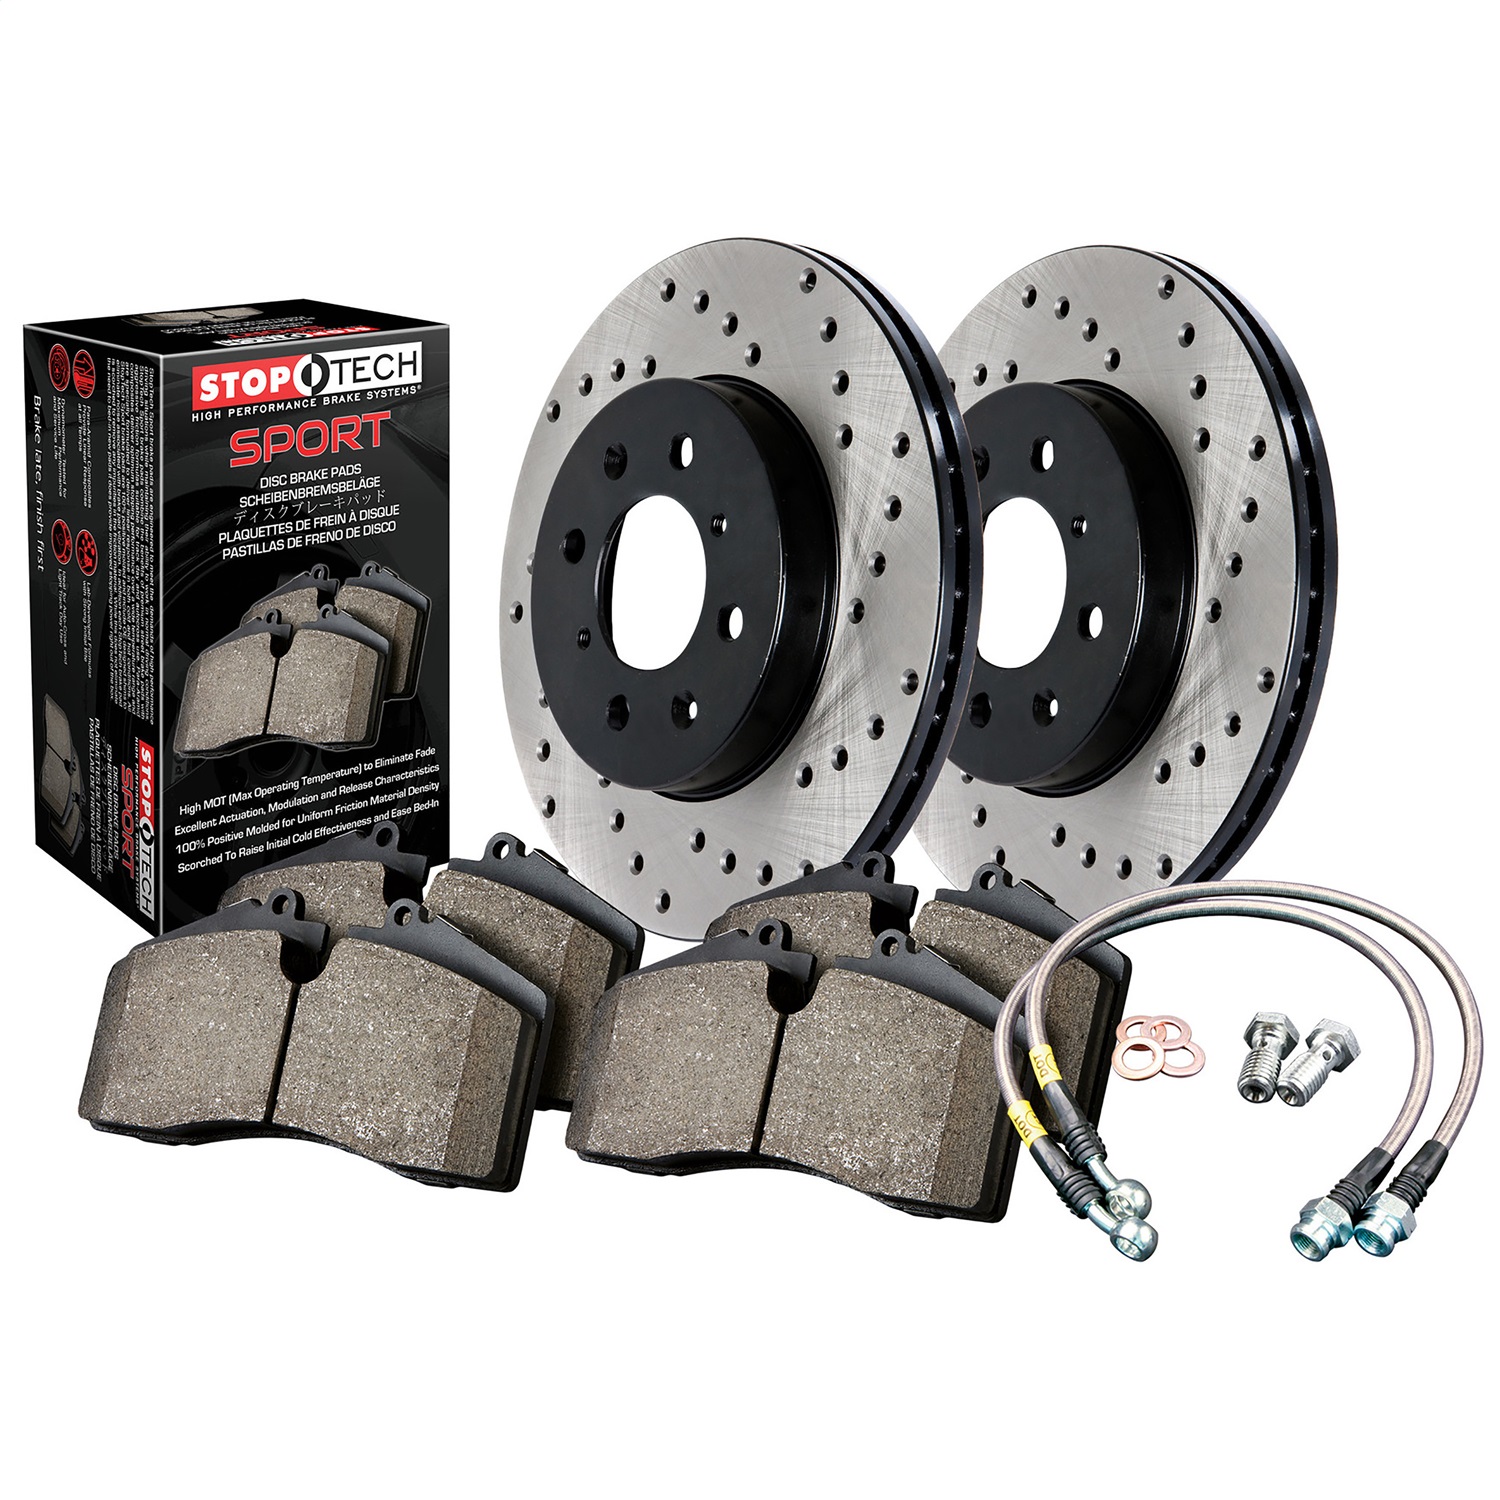 StopTech 979.44038F Sport Disc Brake Kit w/Cross-Drilled Rotors Fits 11-17 IS350